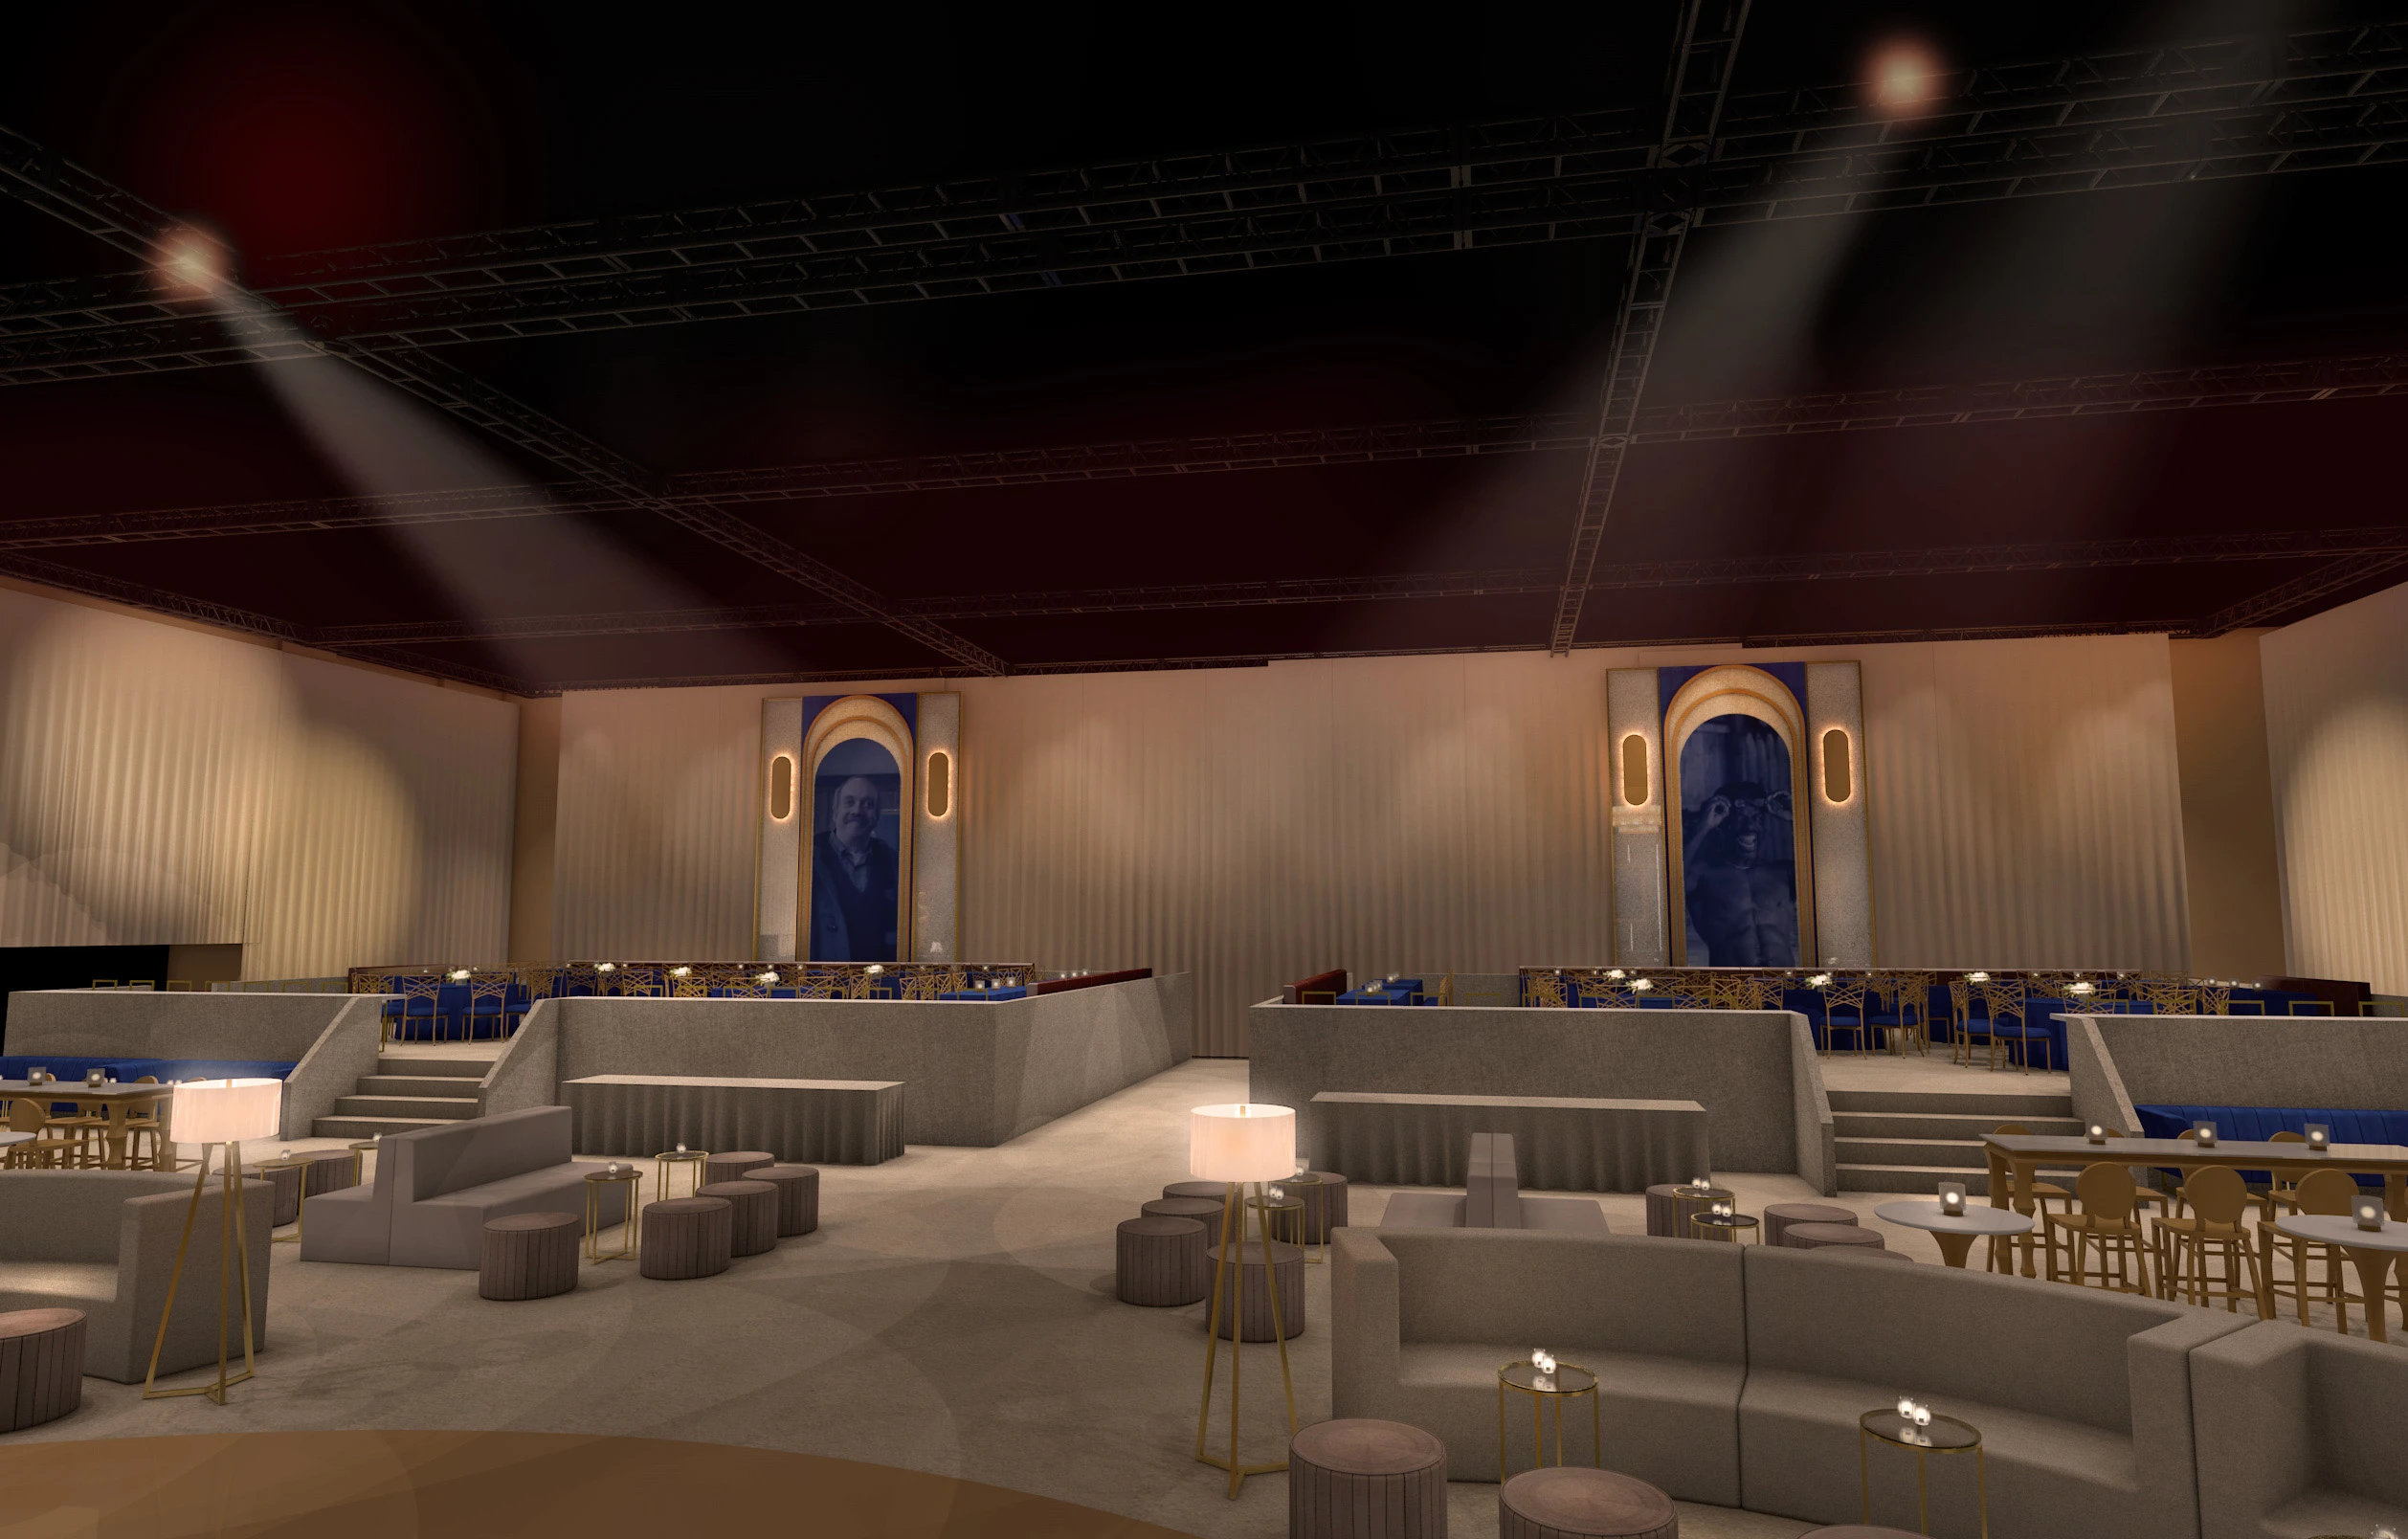 96th Oscars Governors Ball Decor Renderings